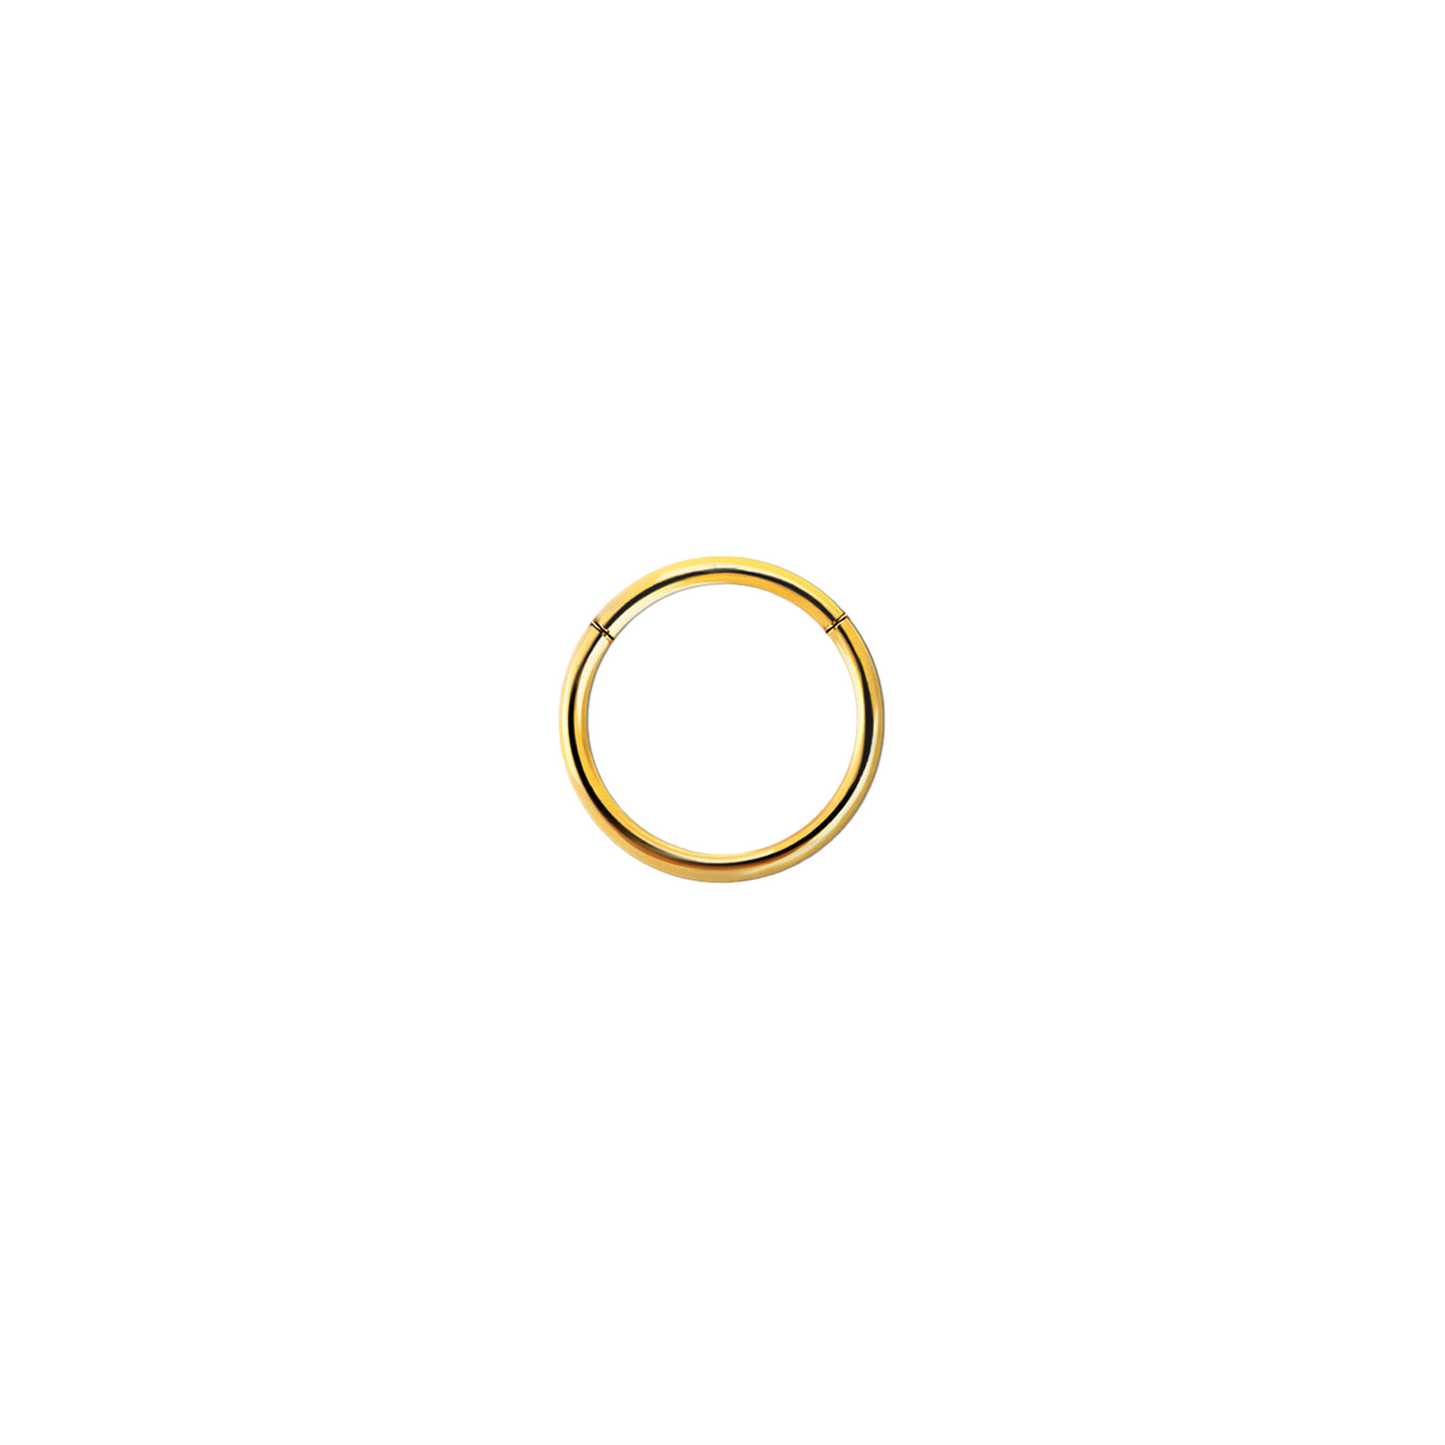 20g Gold PVD Plated Surgical Steel Hinged Ring